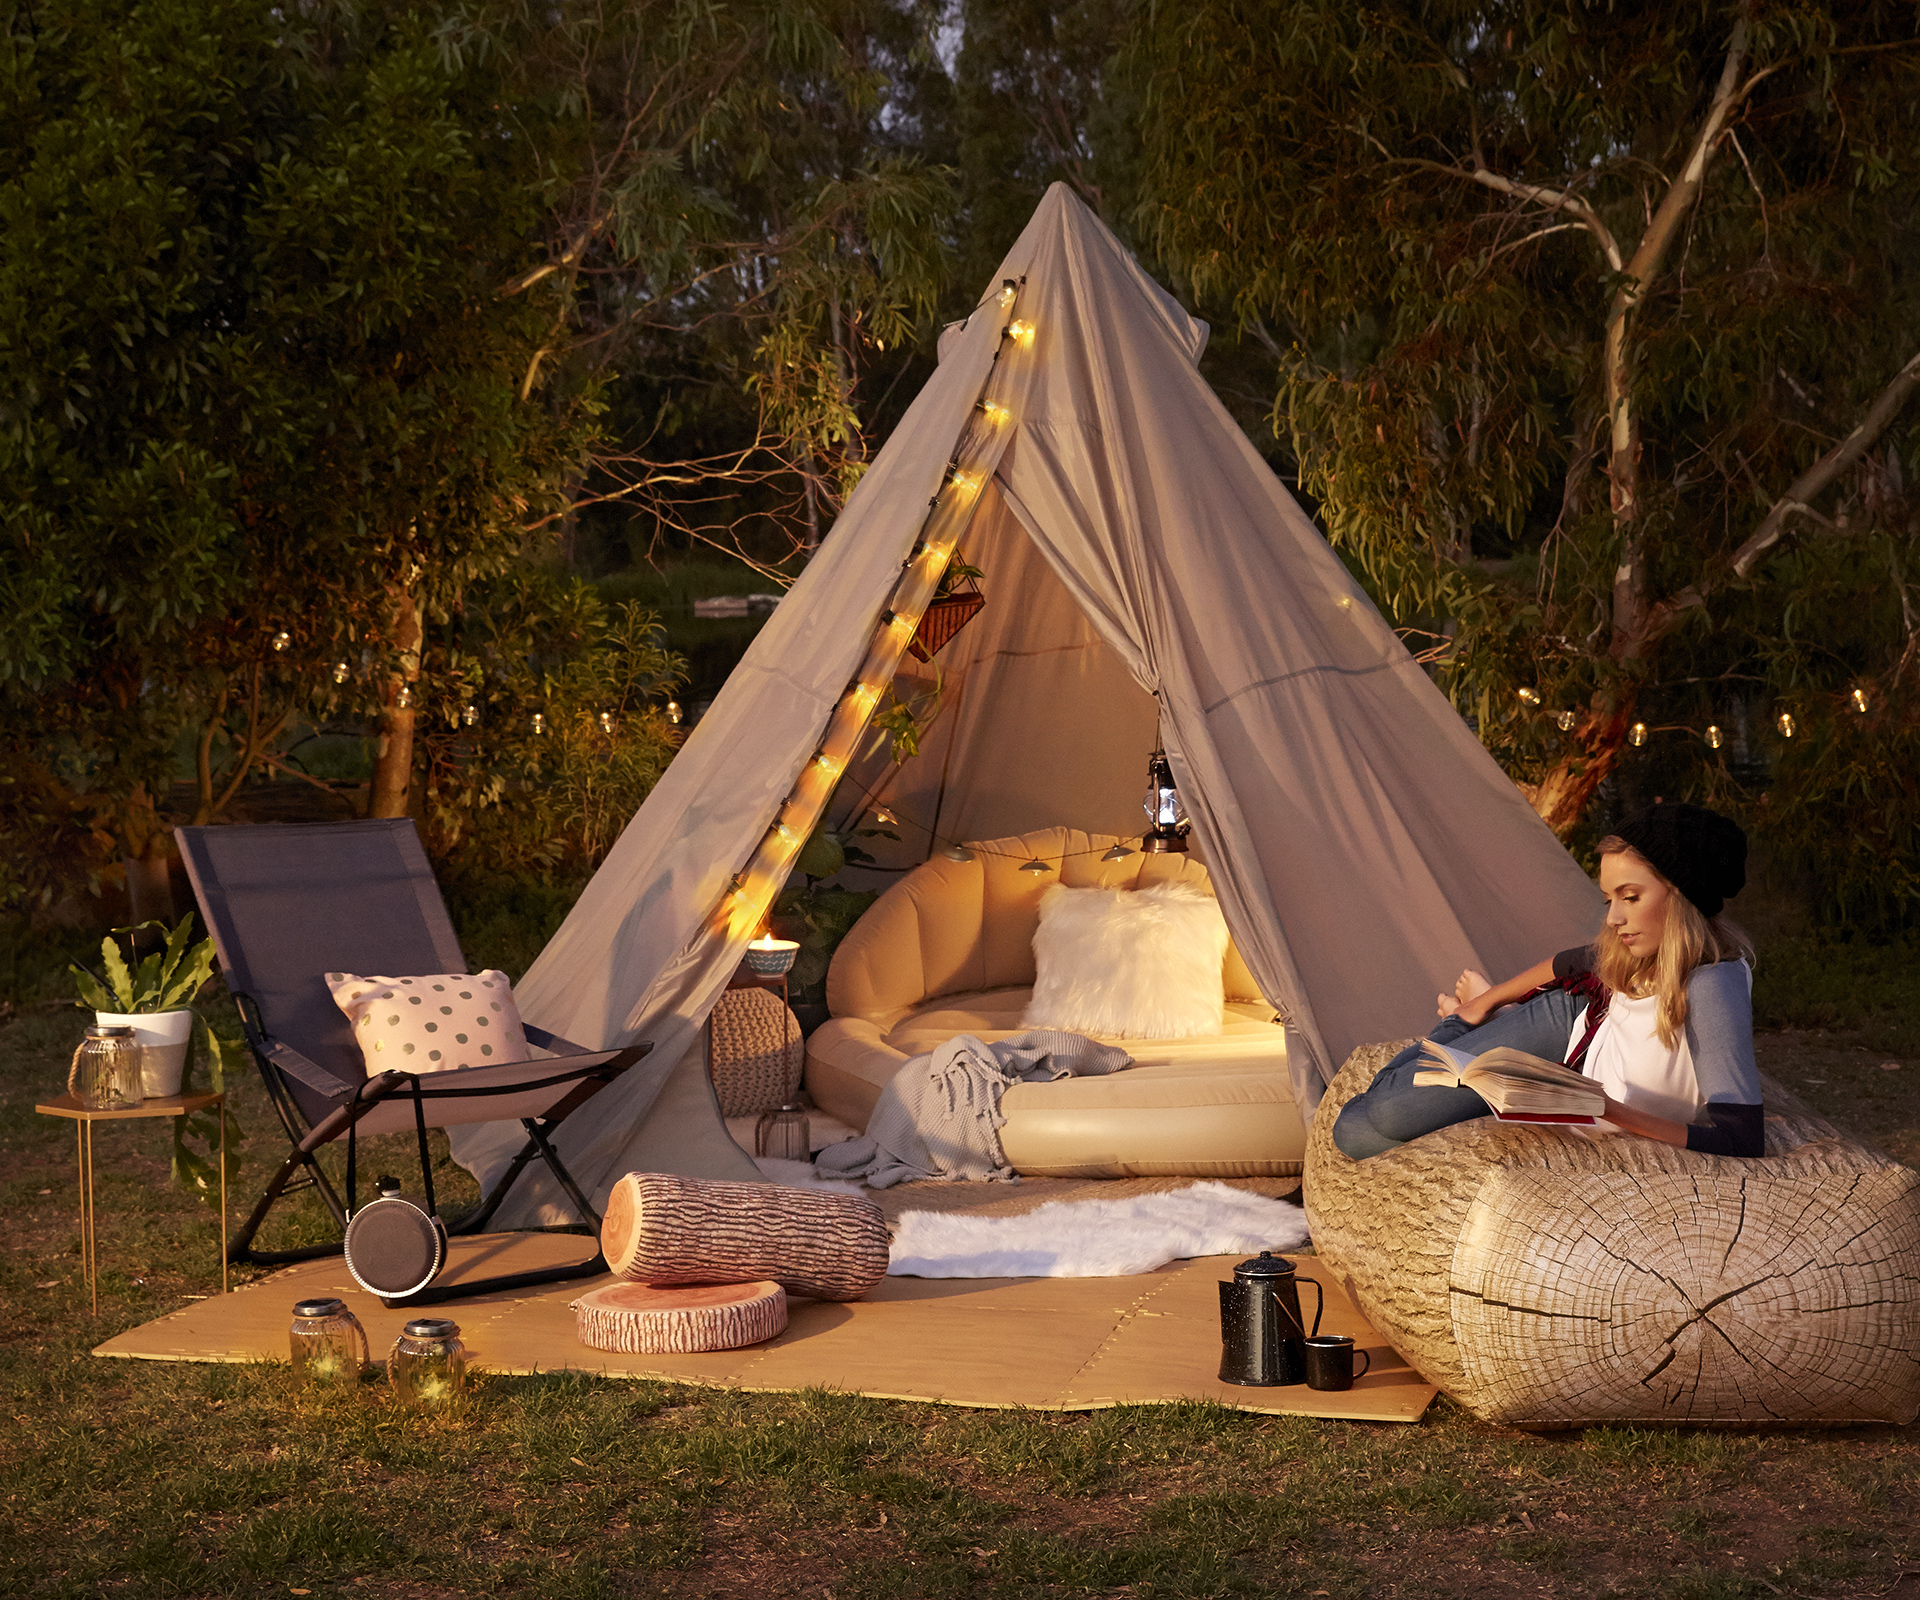 This affordable new glamping range is super cute
